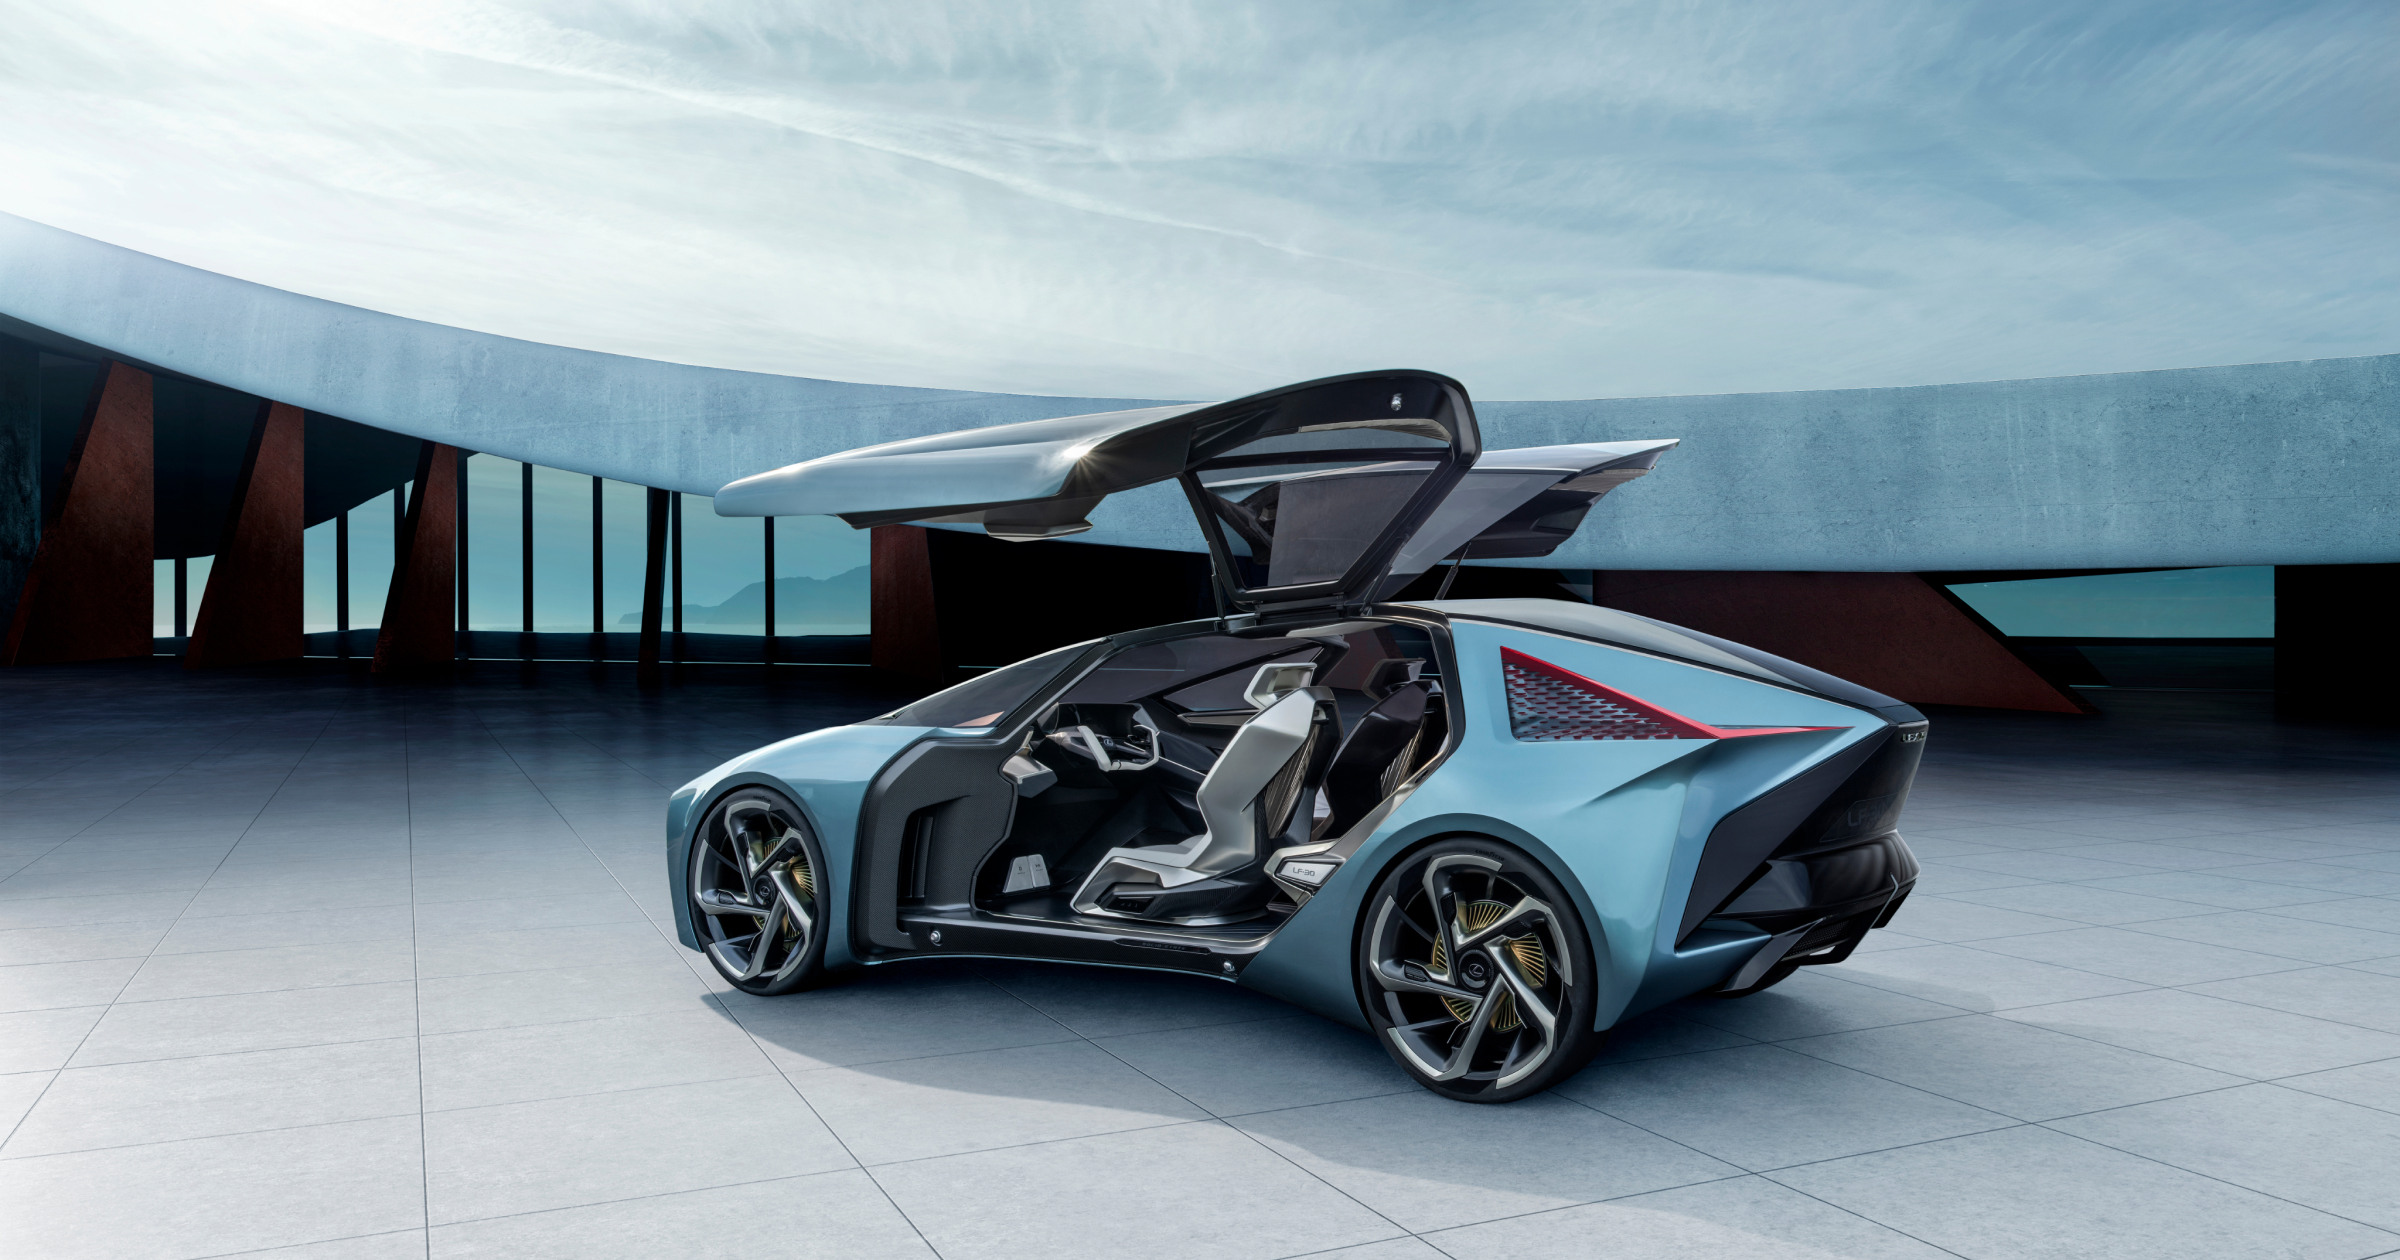 The LF-30 Electrified Concept / Discover the Global World of Lexus